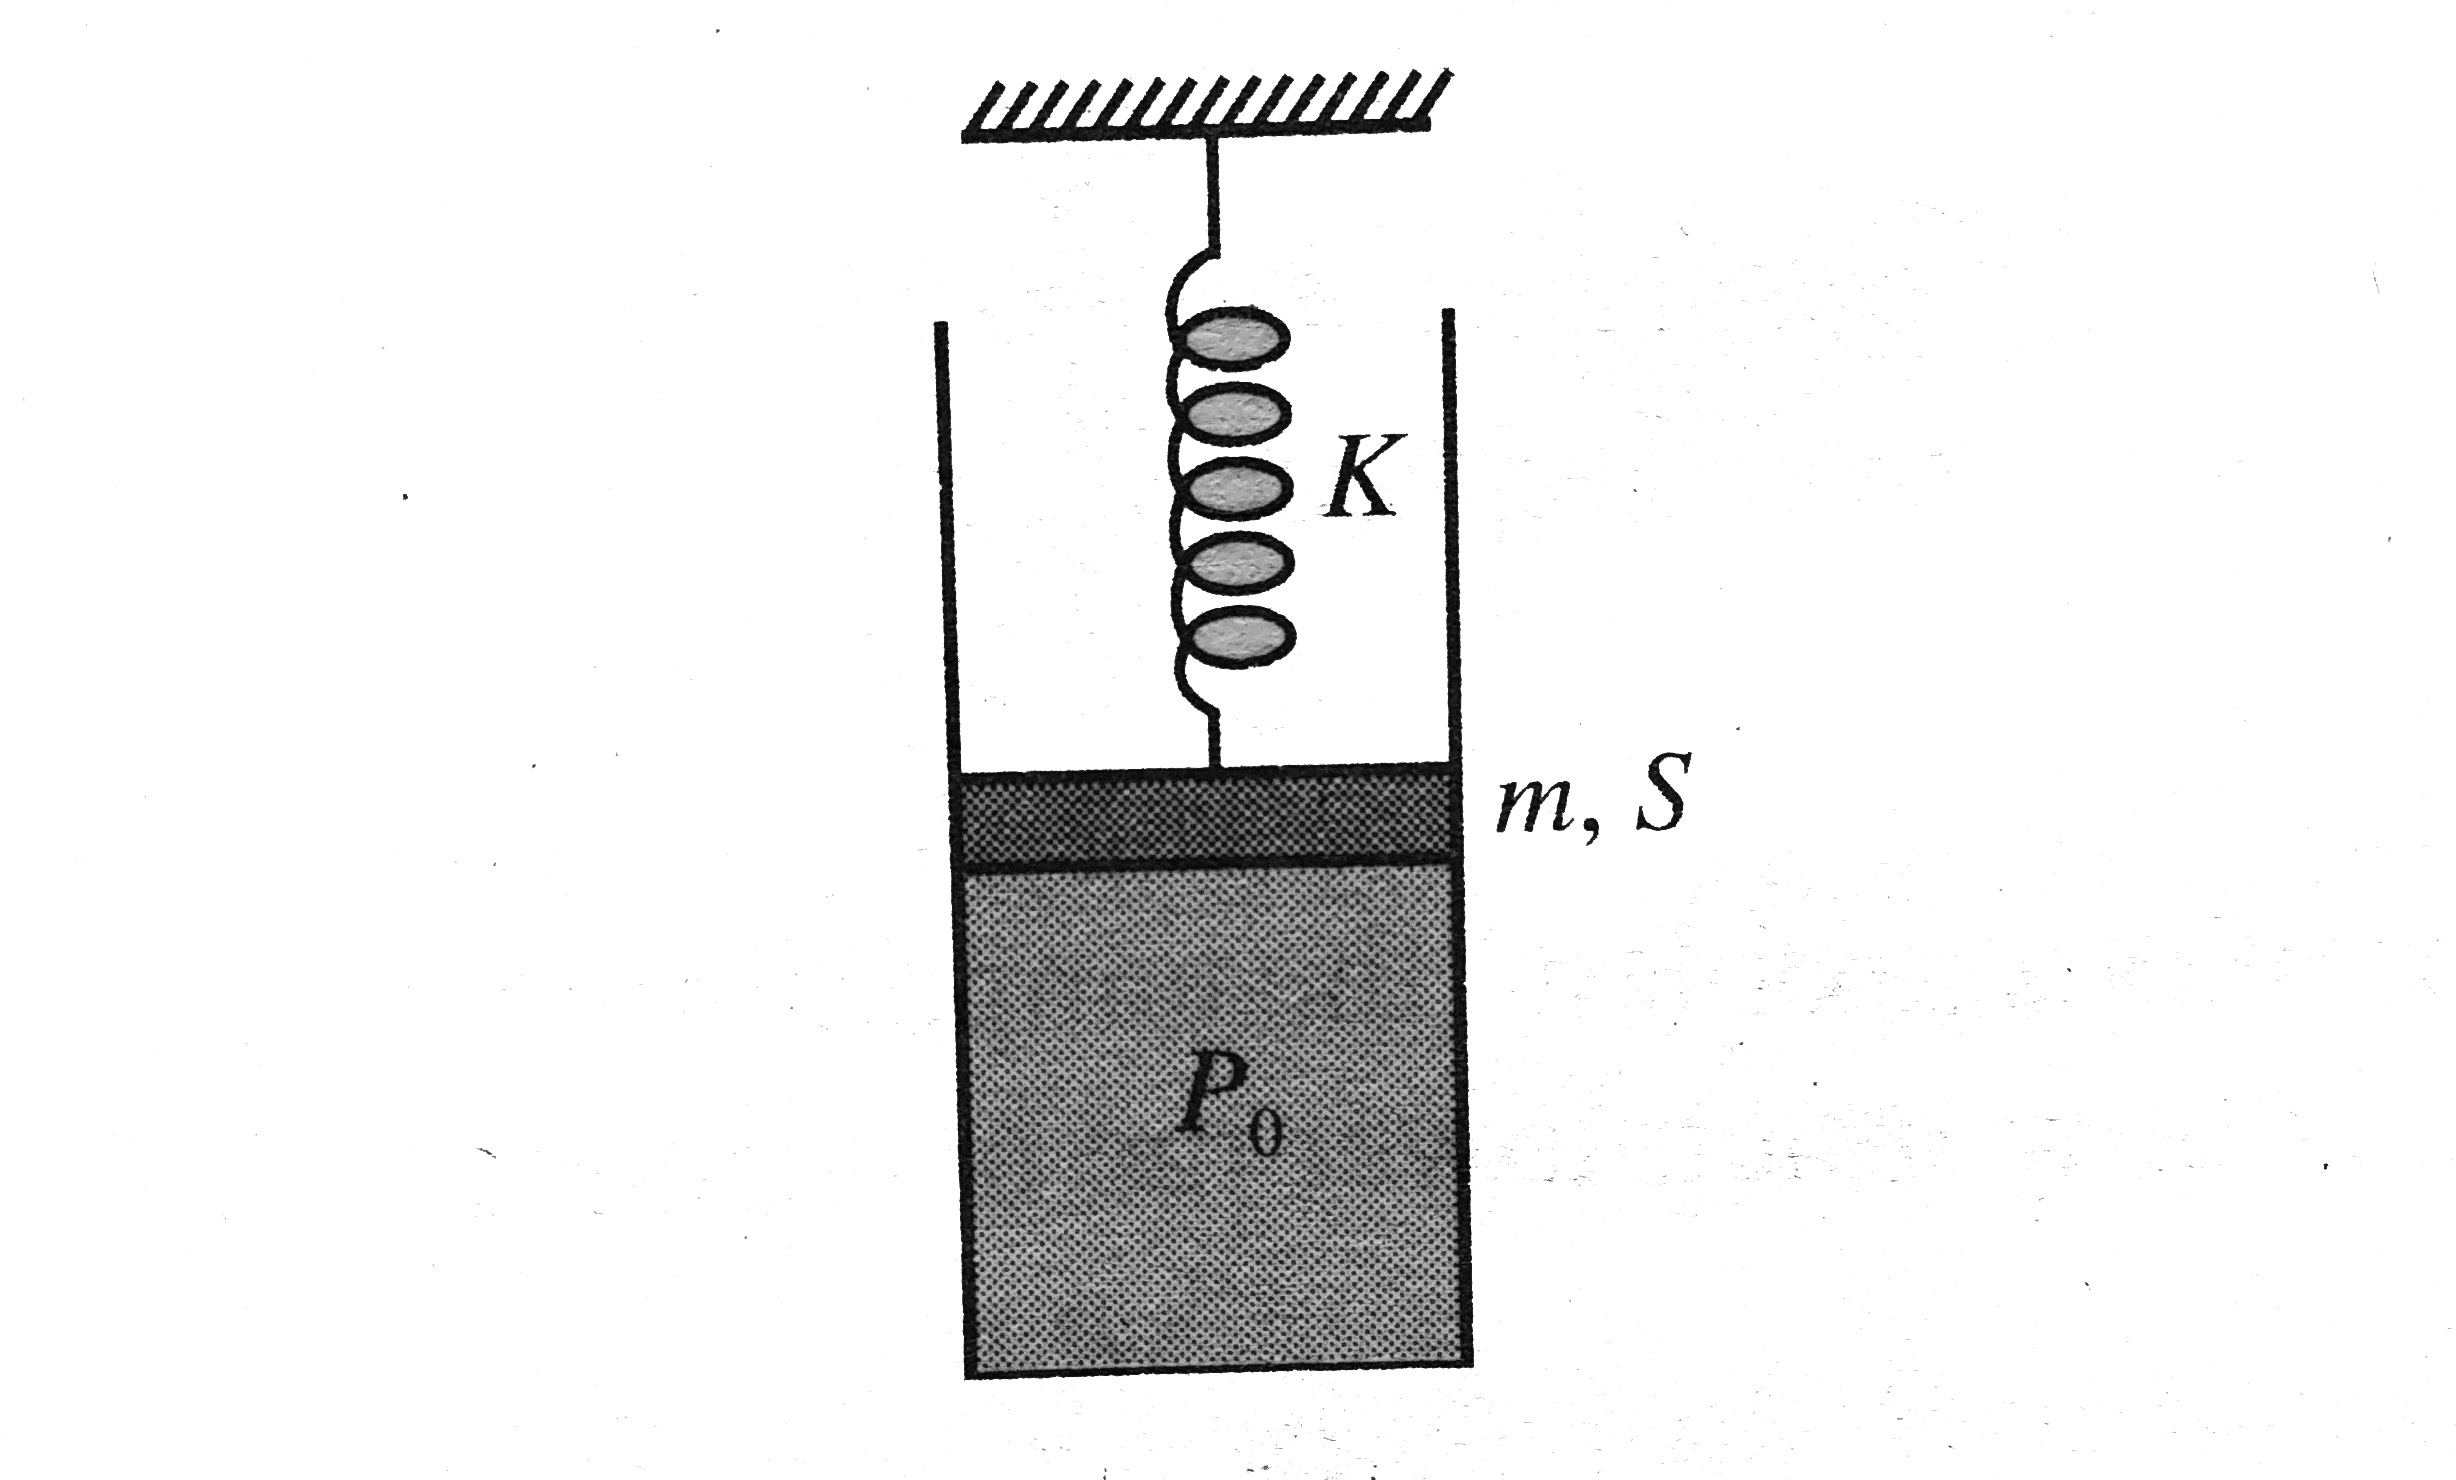 In the arrangement shown in Fig. gas is thermally insulated. An ideal gas is filled in the cylinder having pressure P(0) (gt atmospheric pressure P(0)). The spring of force constant K is initially unstretched. The piston of mass m and area S is frictionless. In equilibrium, the piston rises up by distance x(0), then